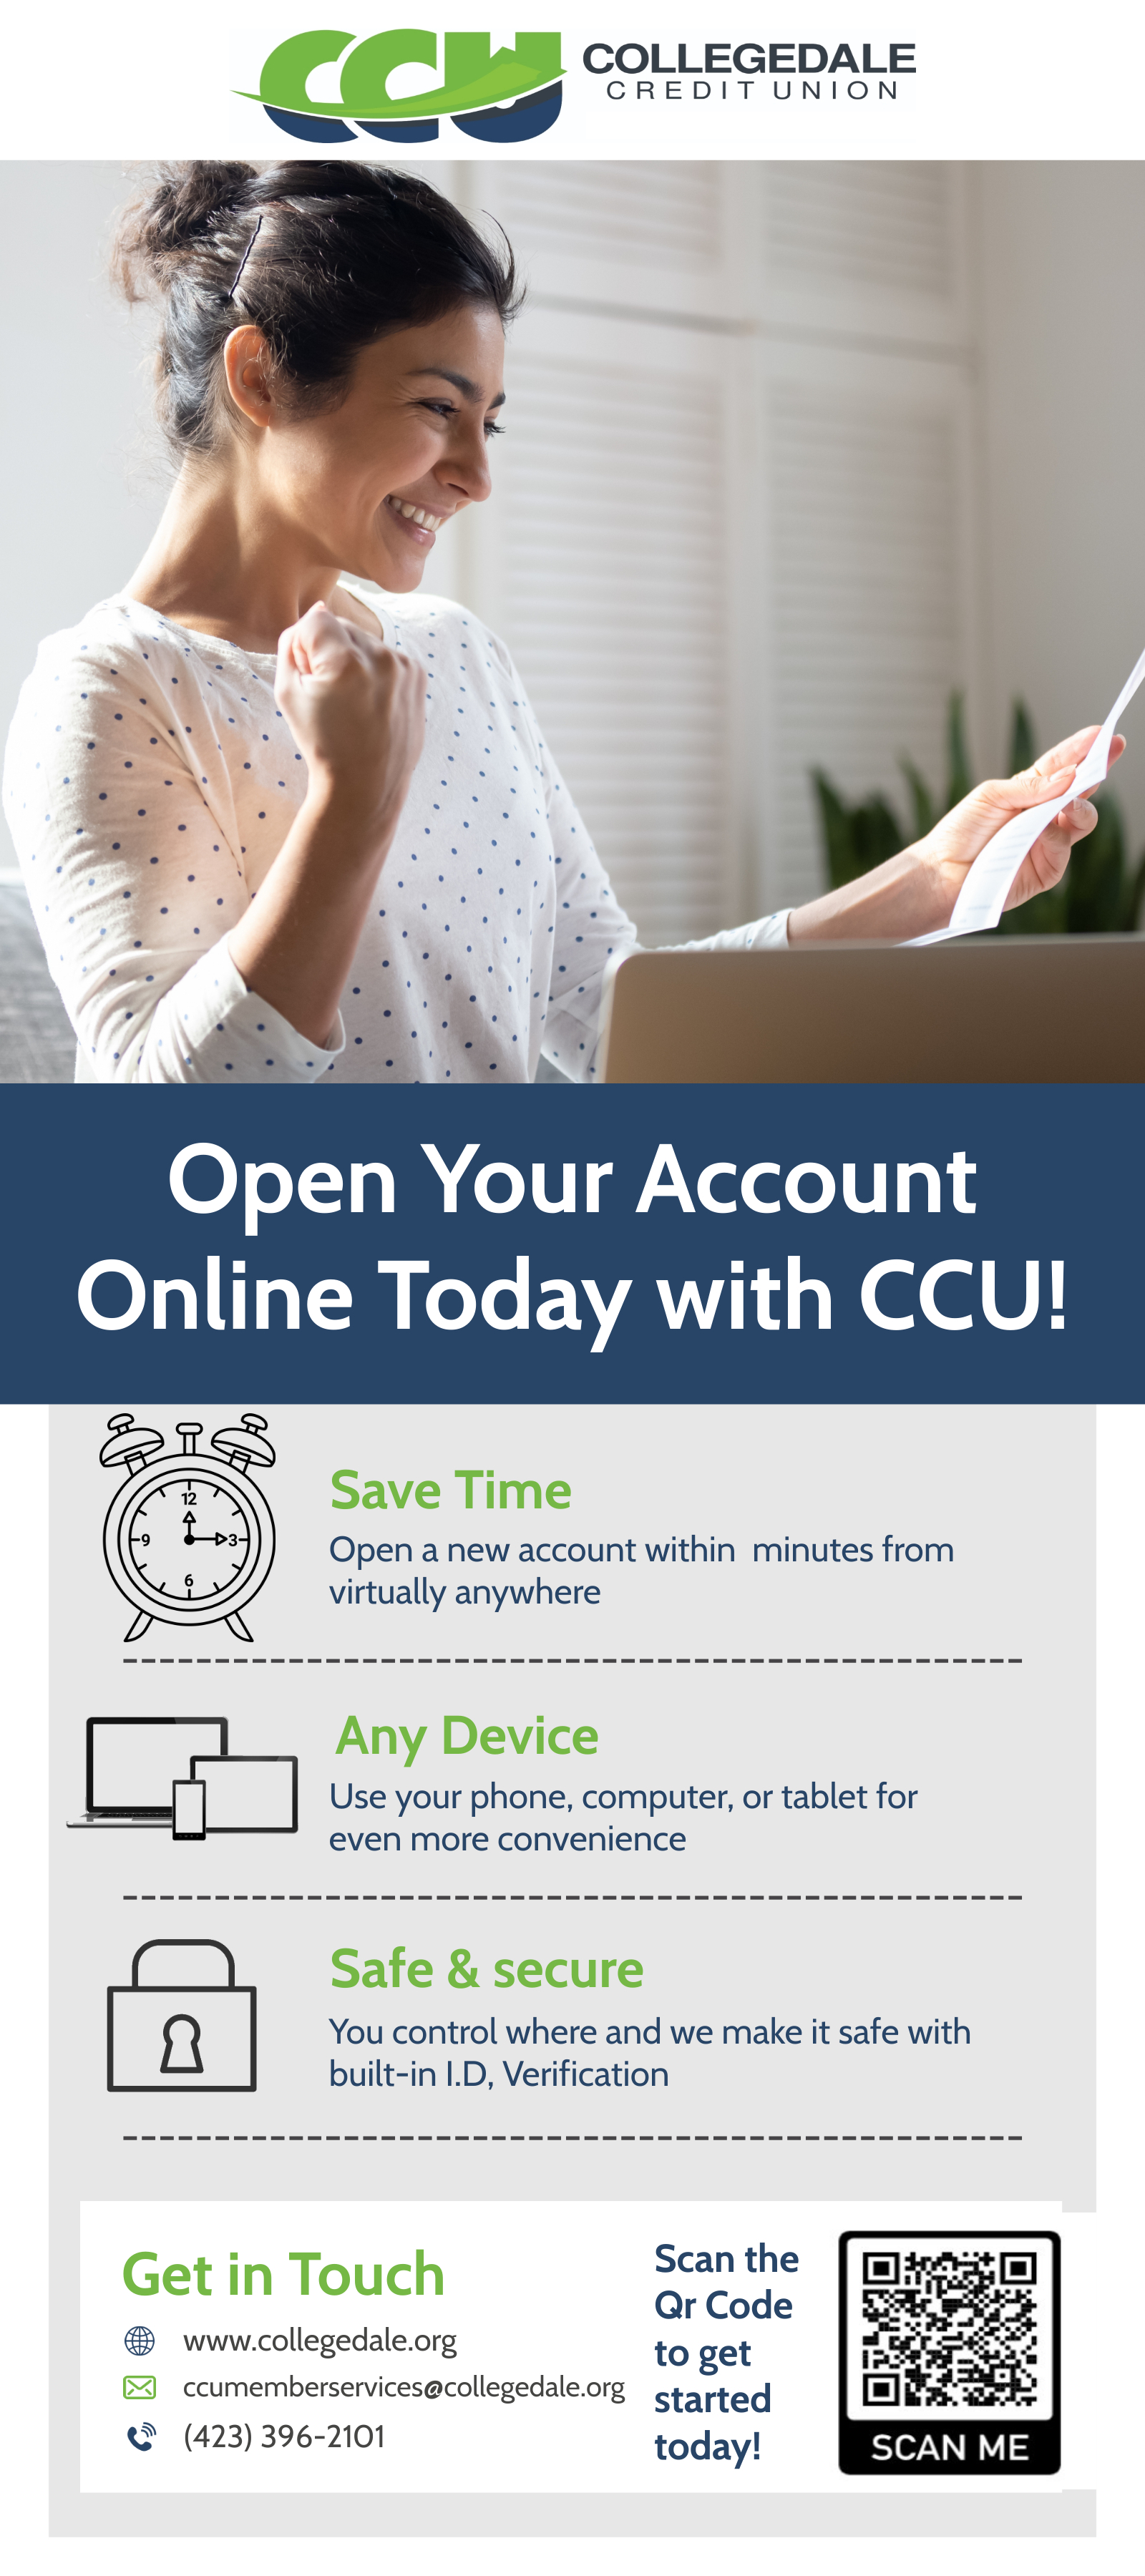 Image of a women smiline while looking at a piece of pper. Text says 'Open Your Account Online Today with CCU!  Save Time: Open a new account within minutes from virtually anywhere.  Any Device: Use your phone, computer, or tablet.  Safe and Secure: You control where and we make is safe with built-in I.D. Verification.' Image of a QR Code and text saying Scan the QR Code to get started today.